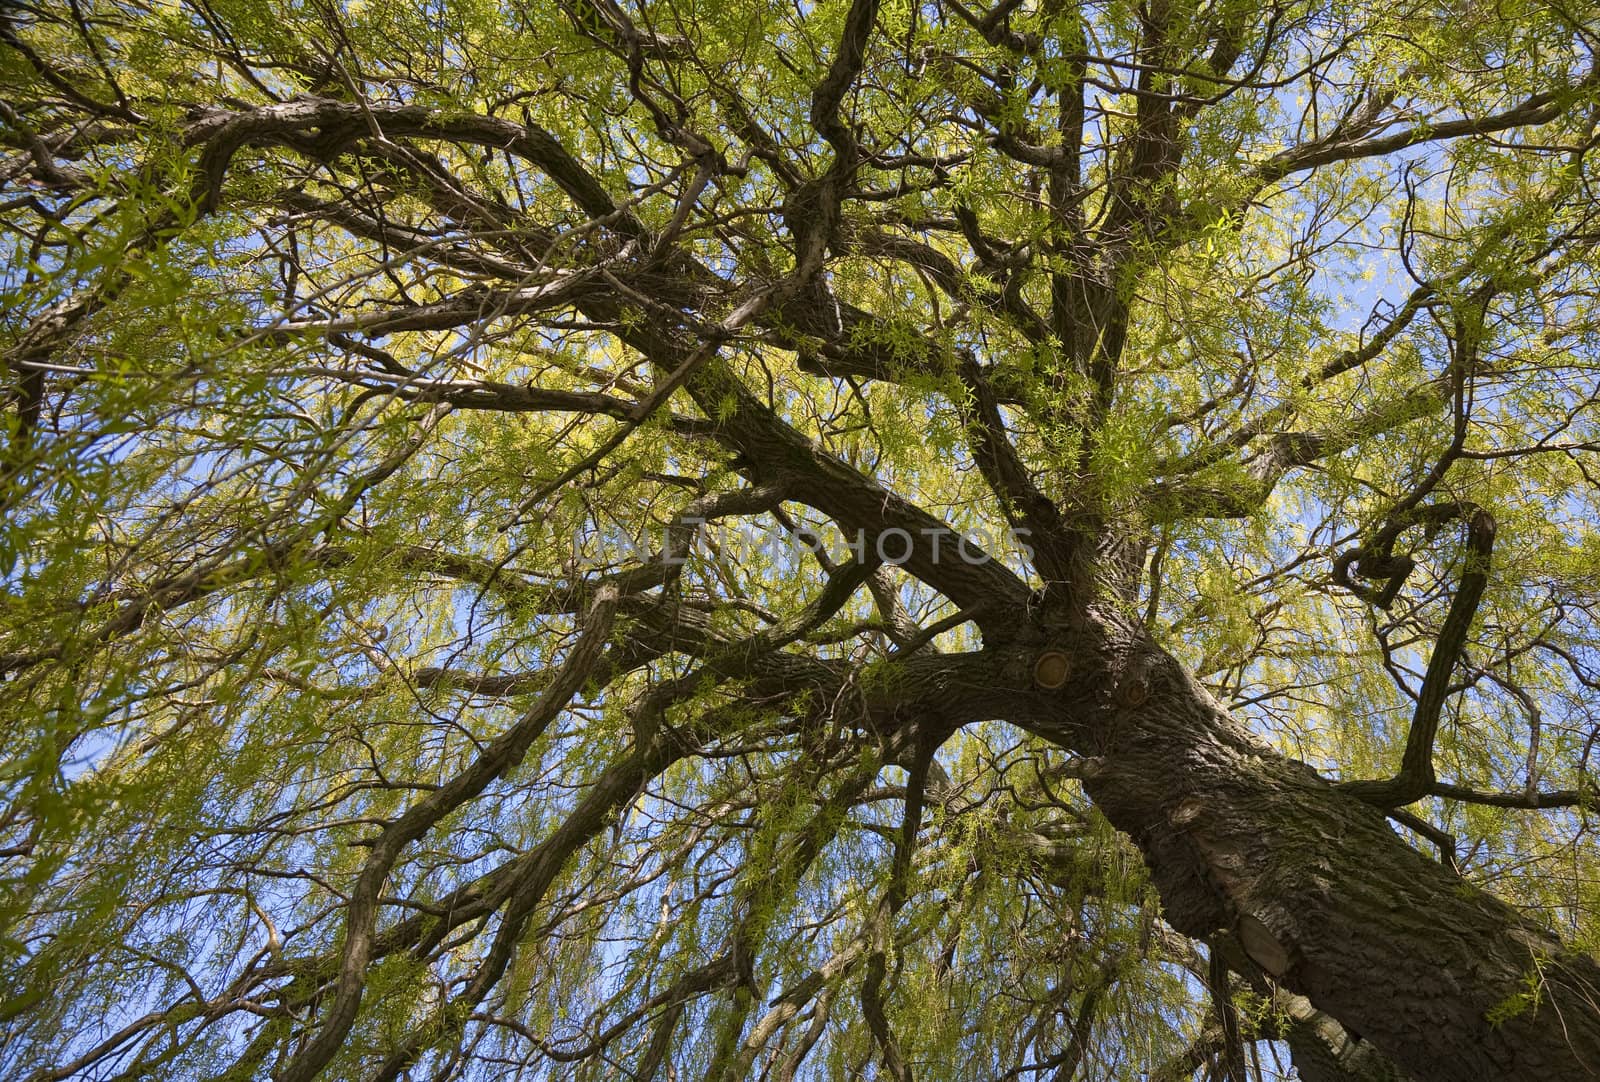 Willow treetop at spring by ABCDK